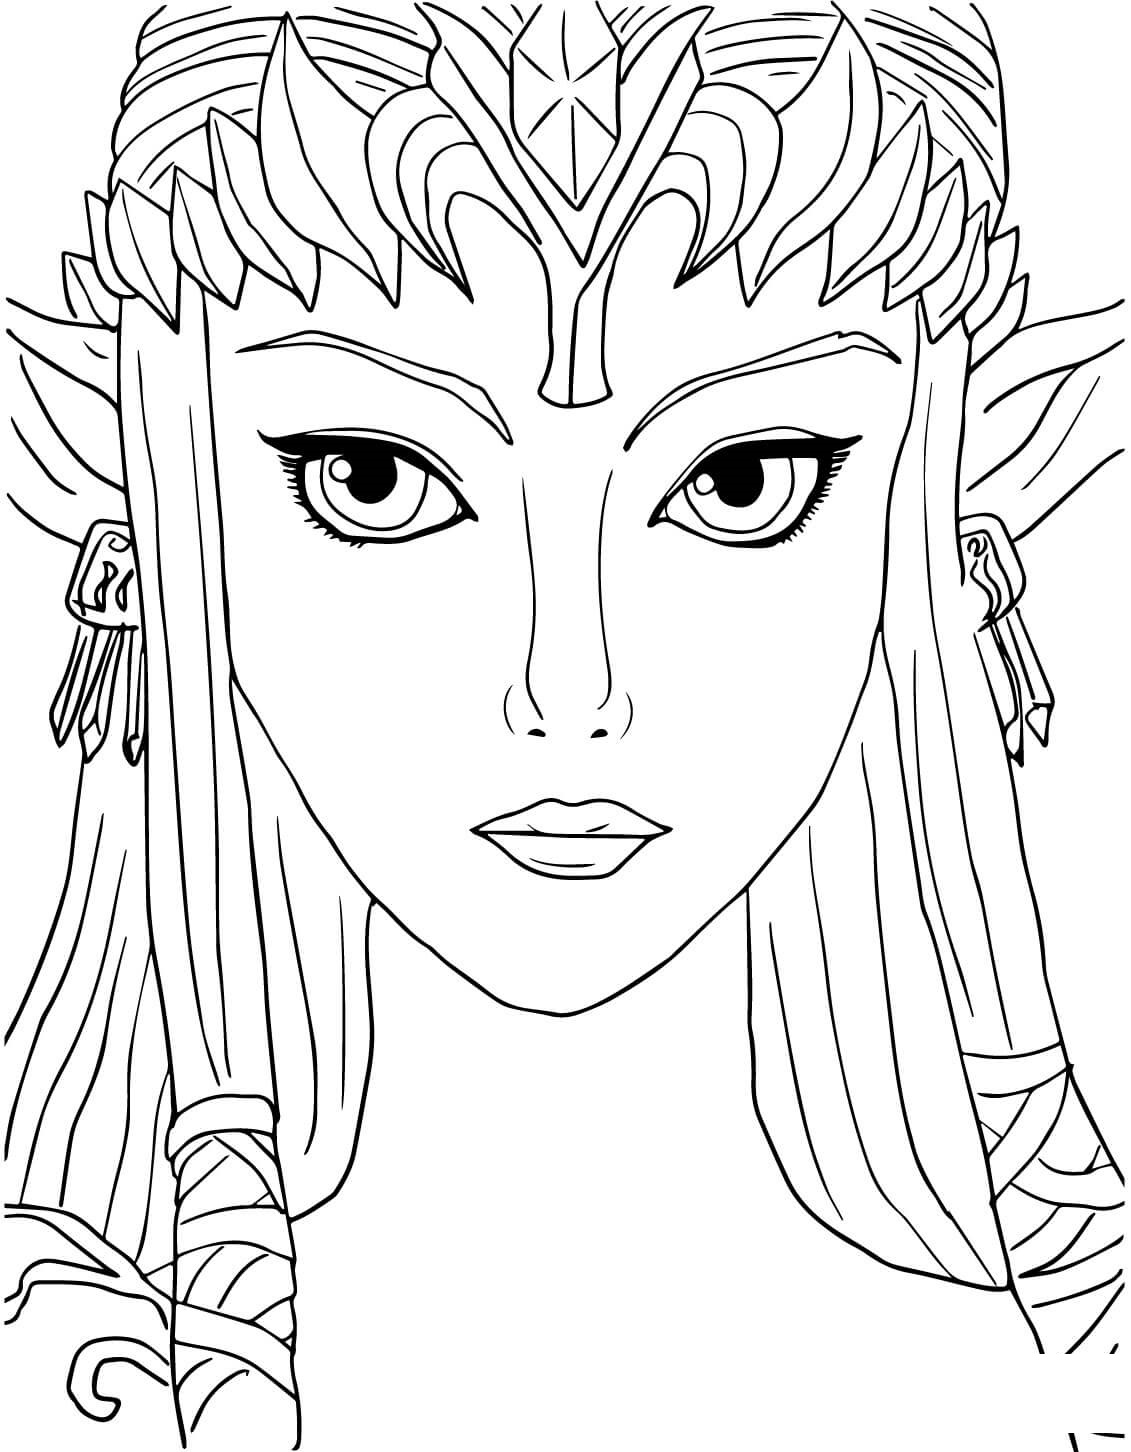 Legend Of Zelda Twilight Princess Coloring Pages   Coloring Cool